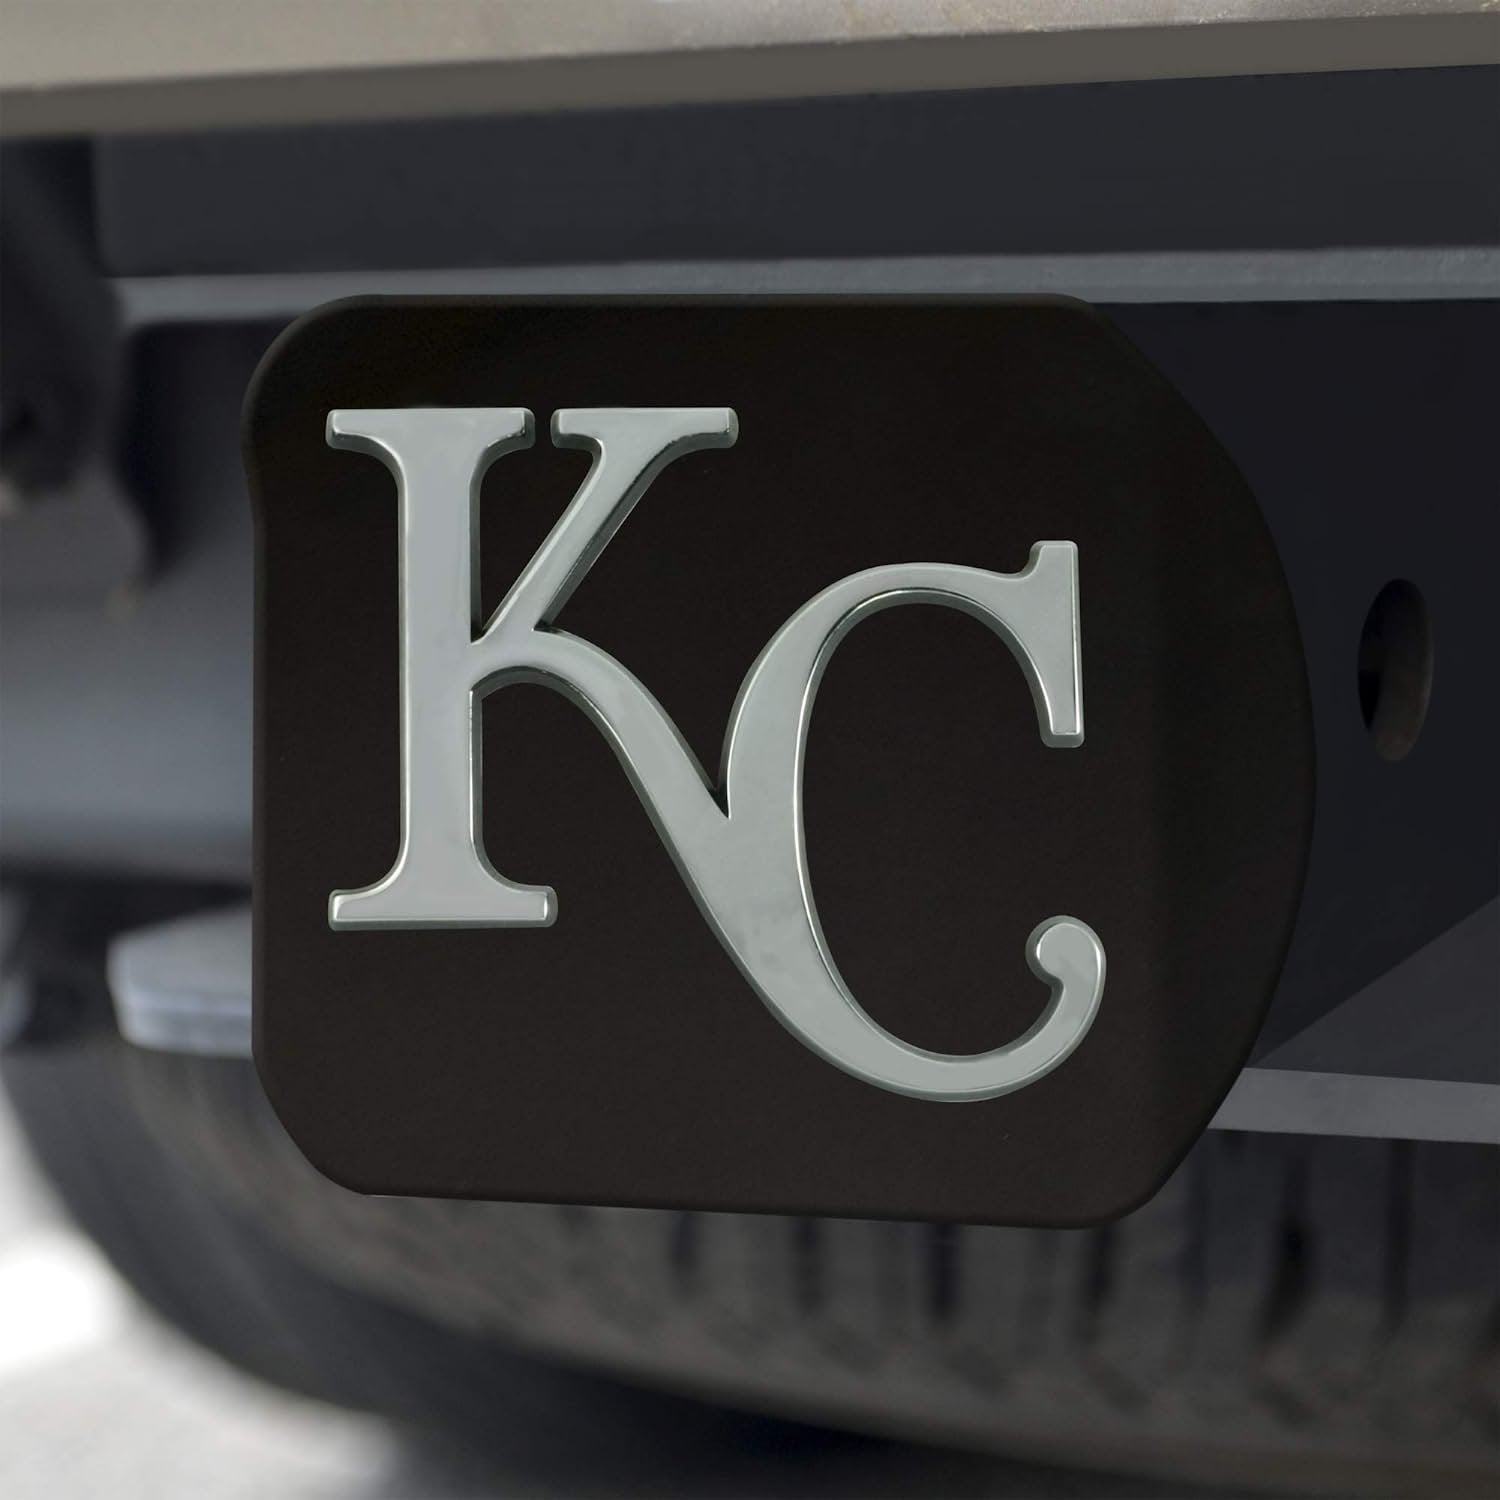 Kansas City Royals Solid Metal Hitch Cover, Black, 2" Square Type III Hitch Cover